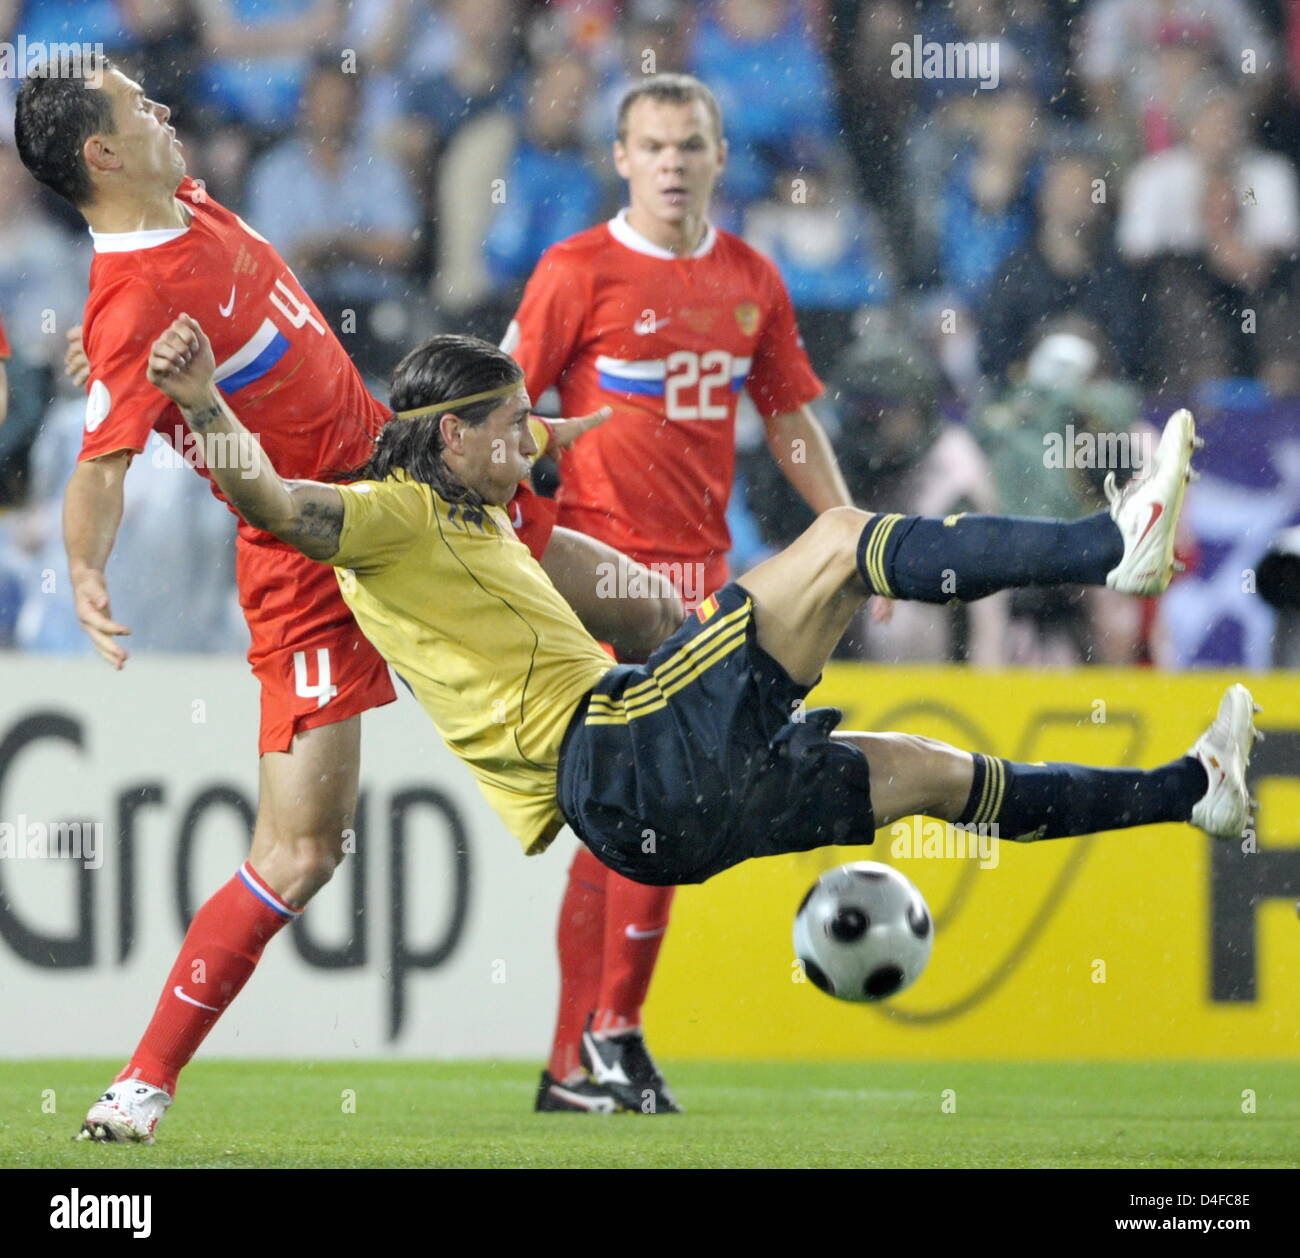 Sergei Ignashevich and Aleksandr Anyukov (C) of Russia vie with Sergio Ramos of Spain during the UEFA EURO 2008 semifinal match between Russia and Spain at the Ernst Happel stadium in Vienna, Austria, 26 June 2008. Photo: Achim Scheidemann dpa +please note UEFA restrictions particulary in regard to slide shows and 'No Mobile Services'+ +++(c) dpa - Bildfunk+++ Stock Photo